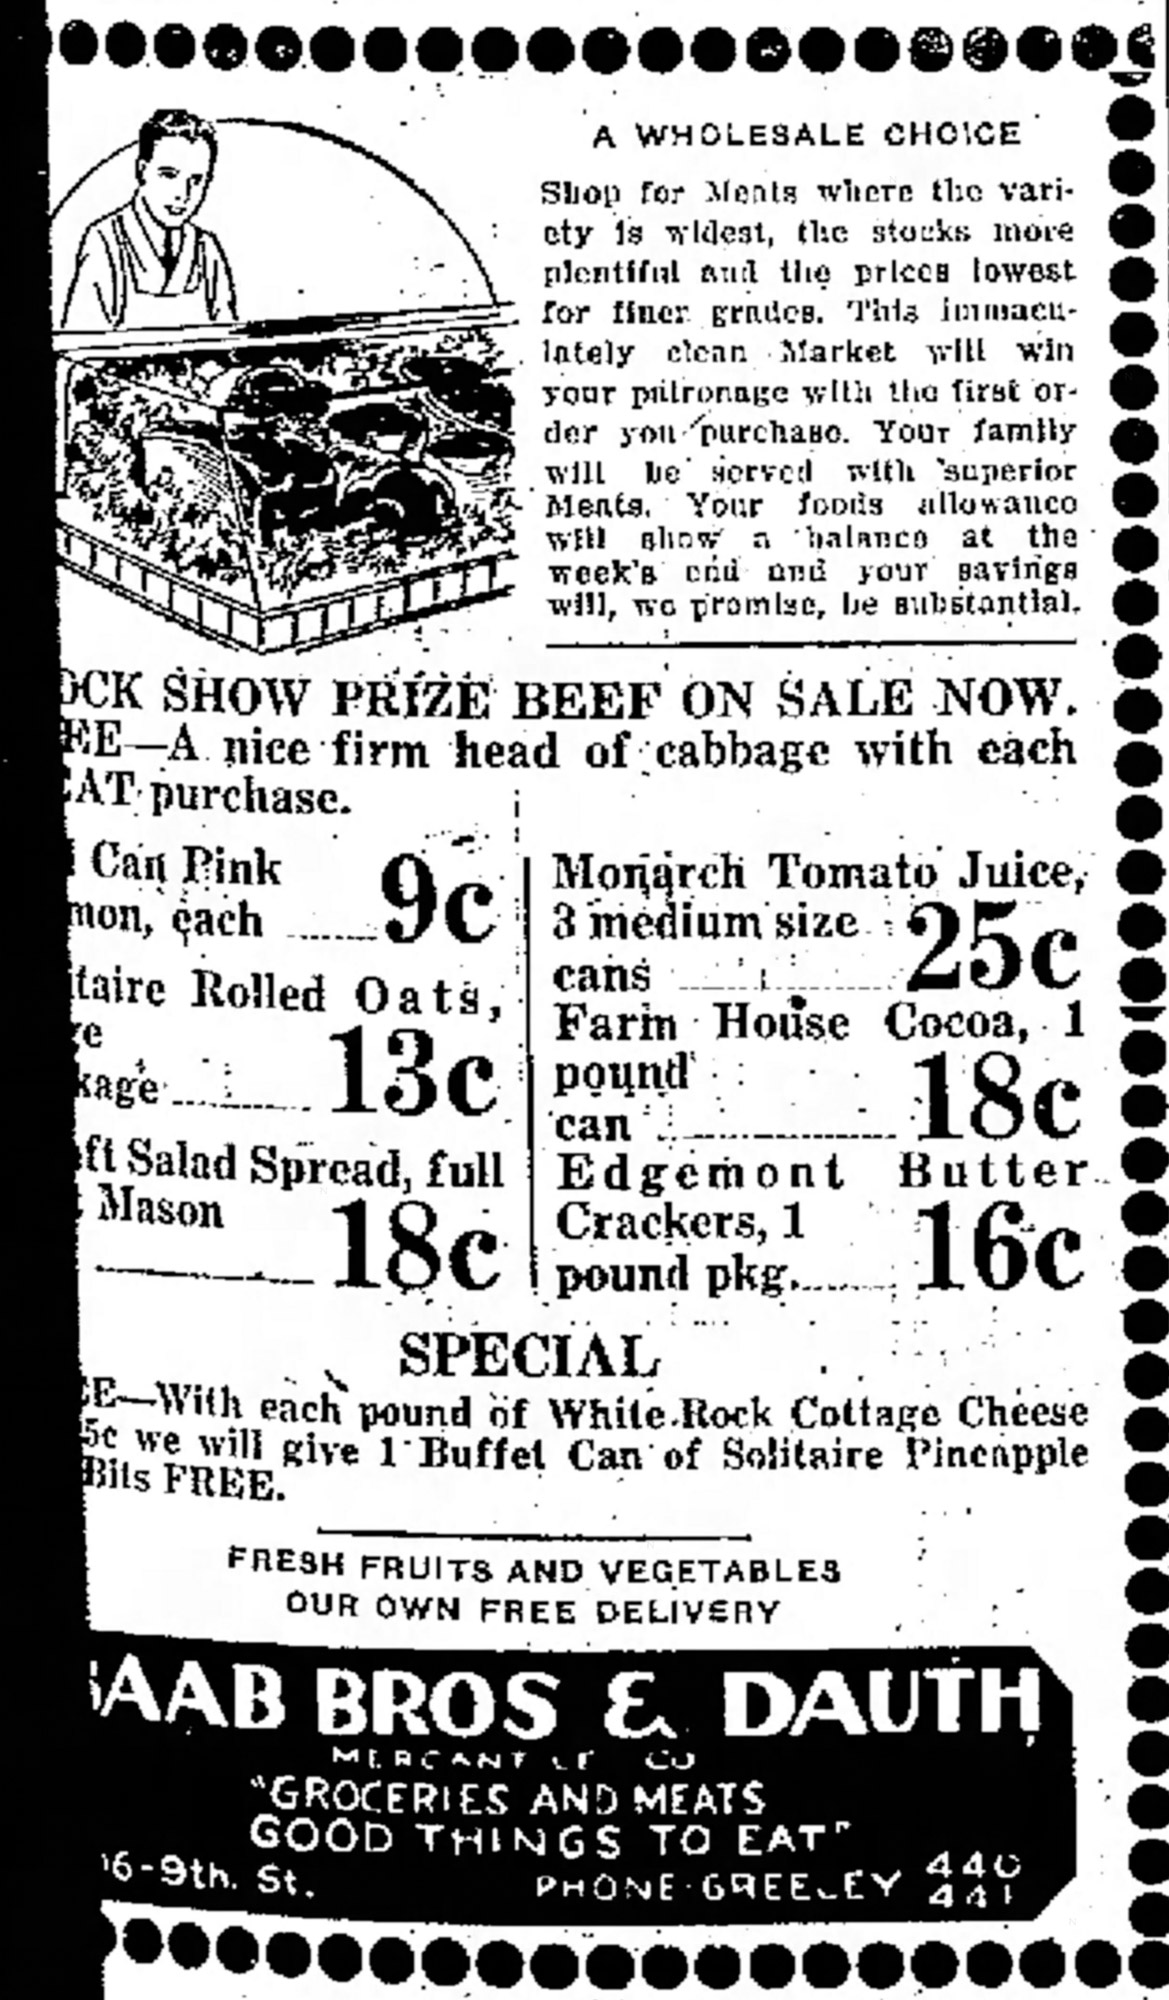 Dauth Family Archive - 1933-01-27 - Greeley Daily Tribune - Baab Bros and Dauth Advertisement